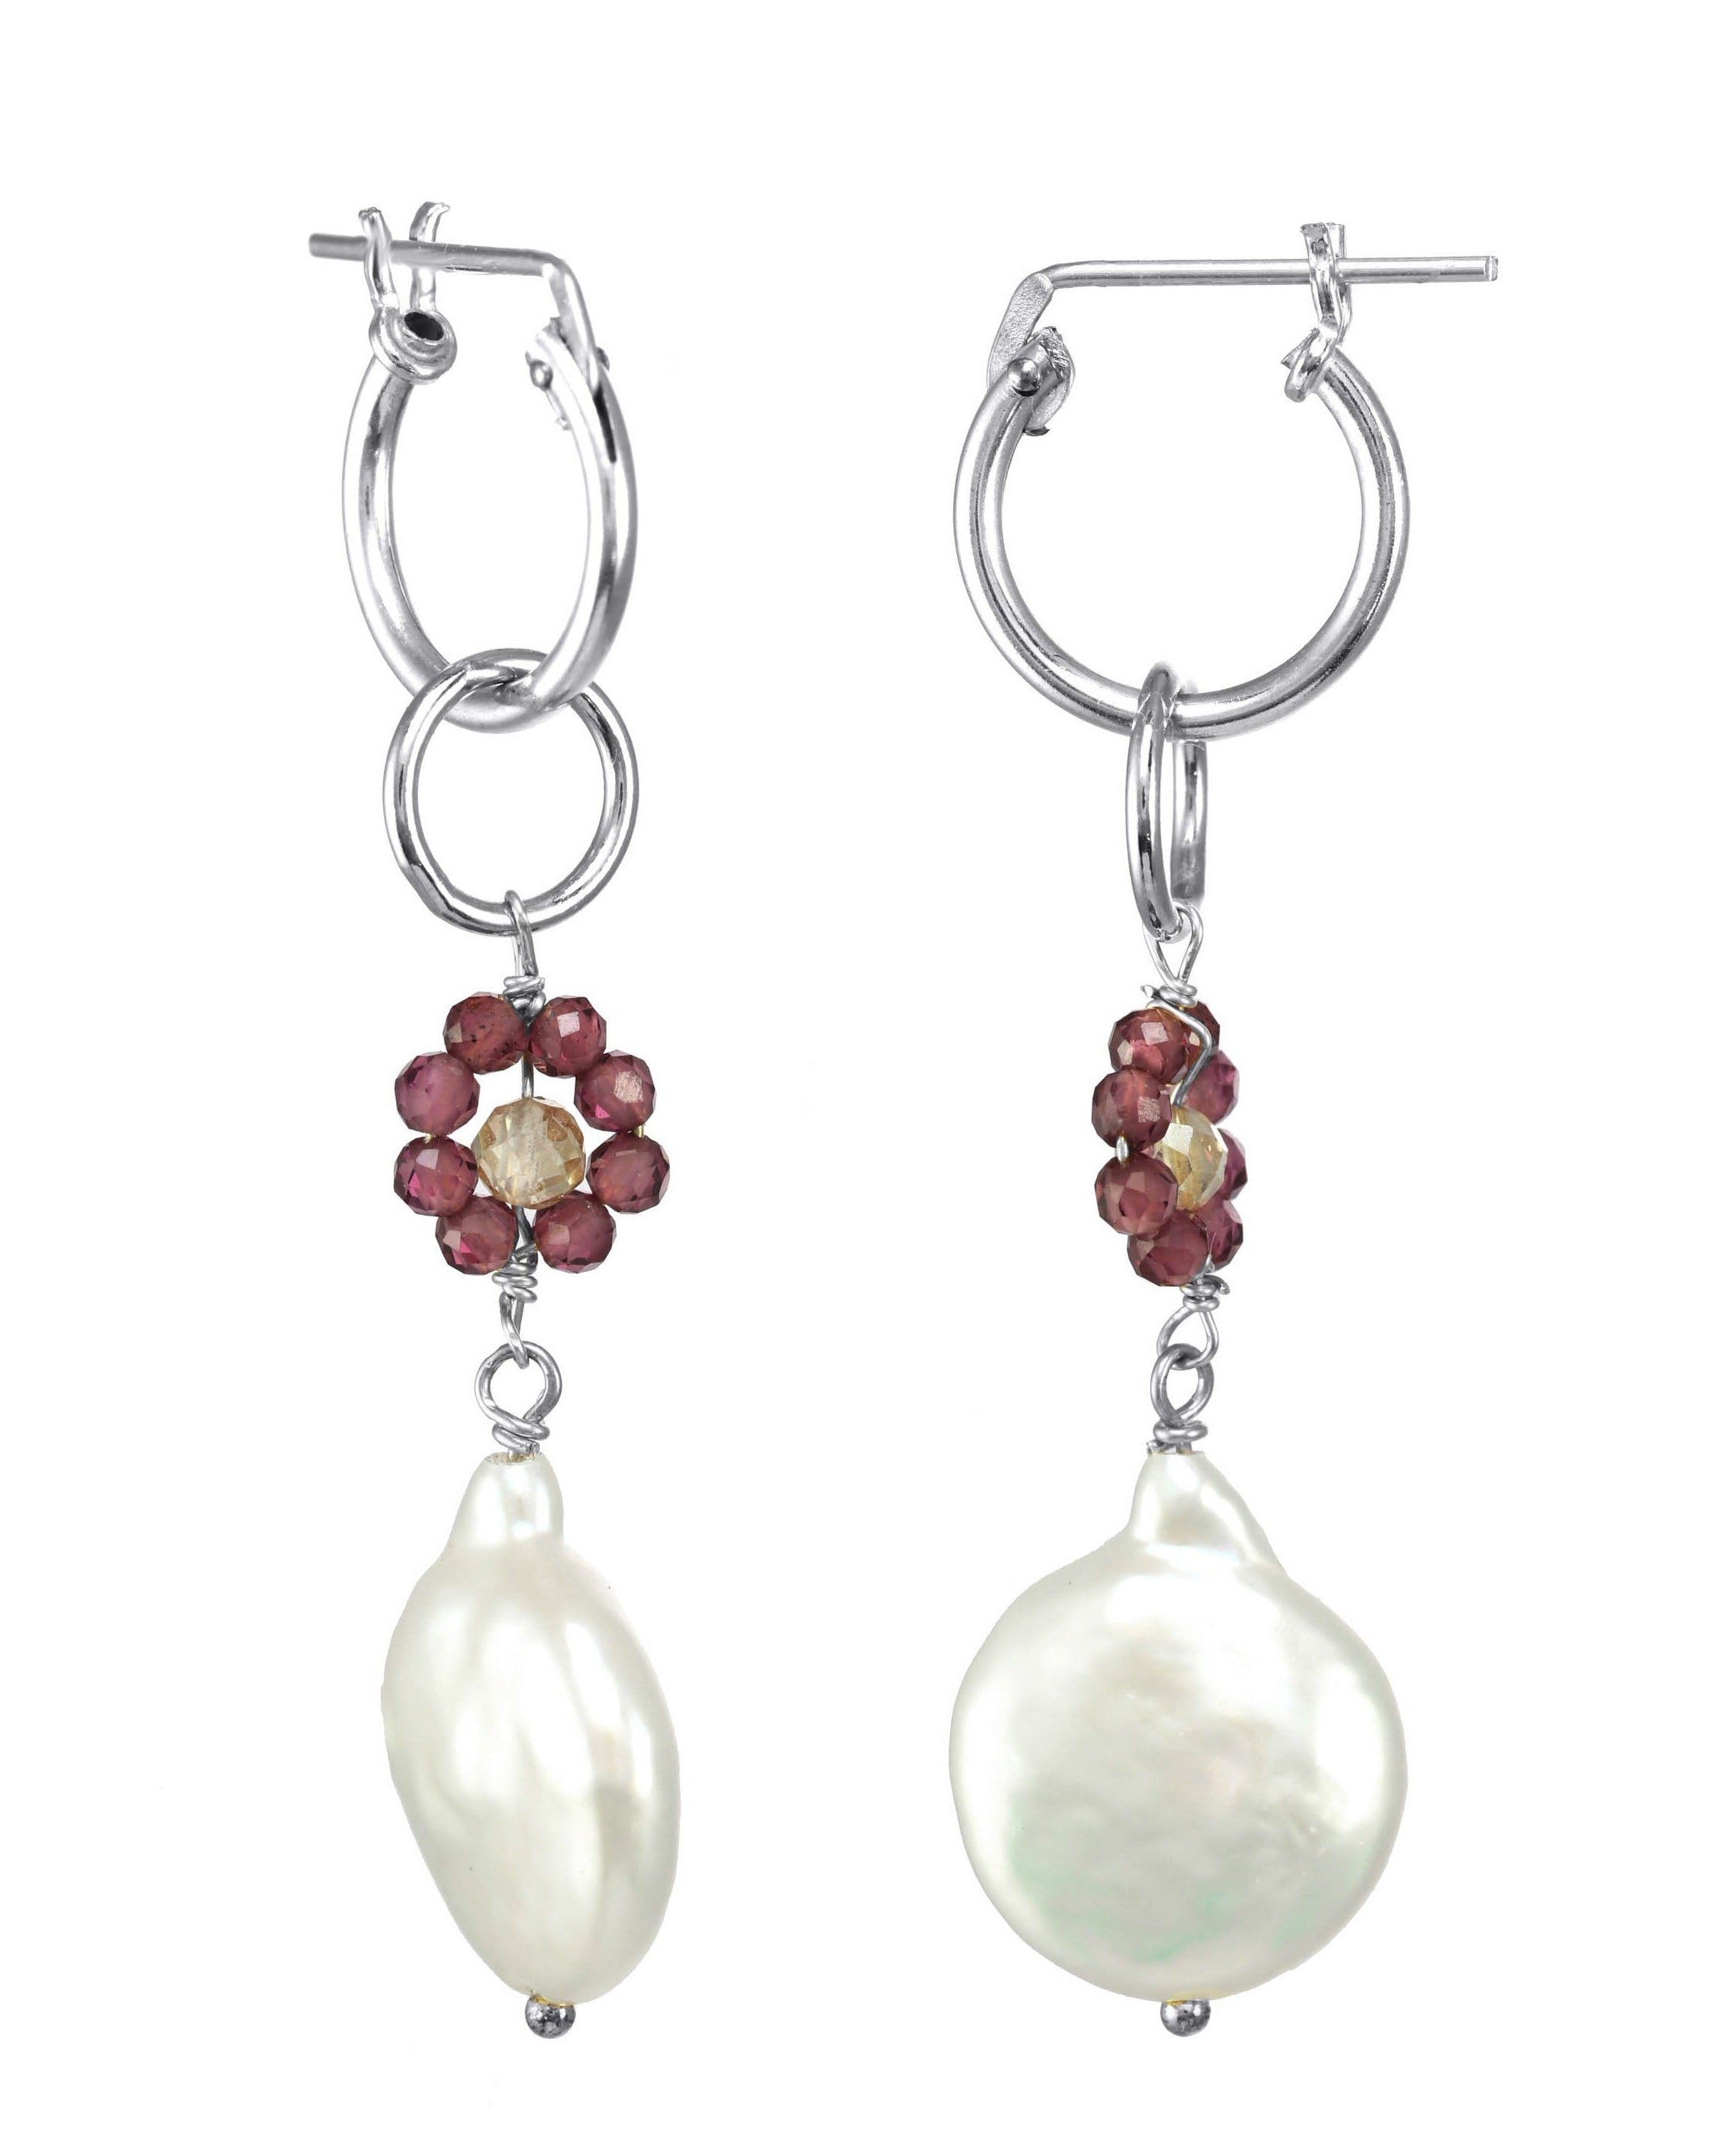 Daisy Del Mar Earrings by Kozakh. 12mm Snap closure hoops crafted in Sterling Silver, featuring 2mm Garnet and 3mm Imperial Topaz forming a flower charm, and a Baroque Pearl.